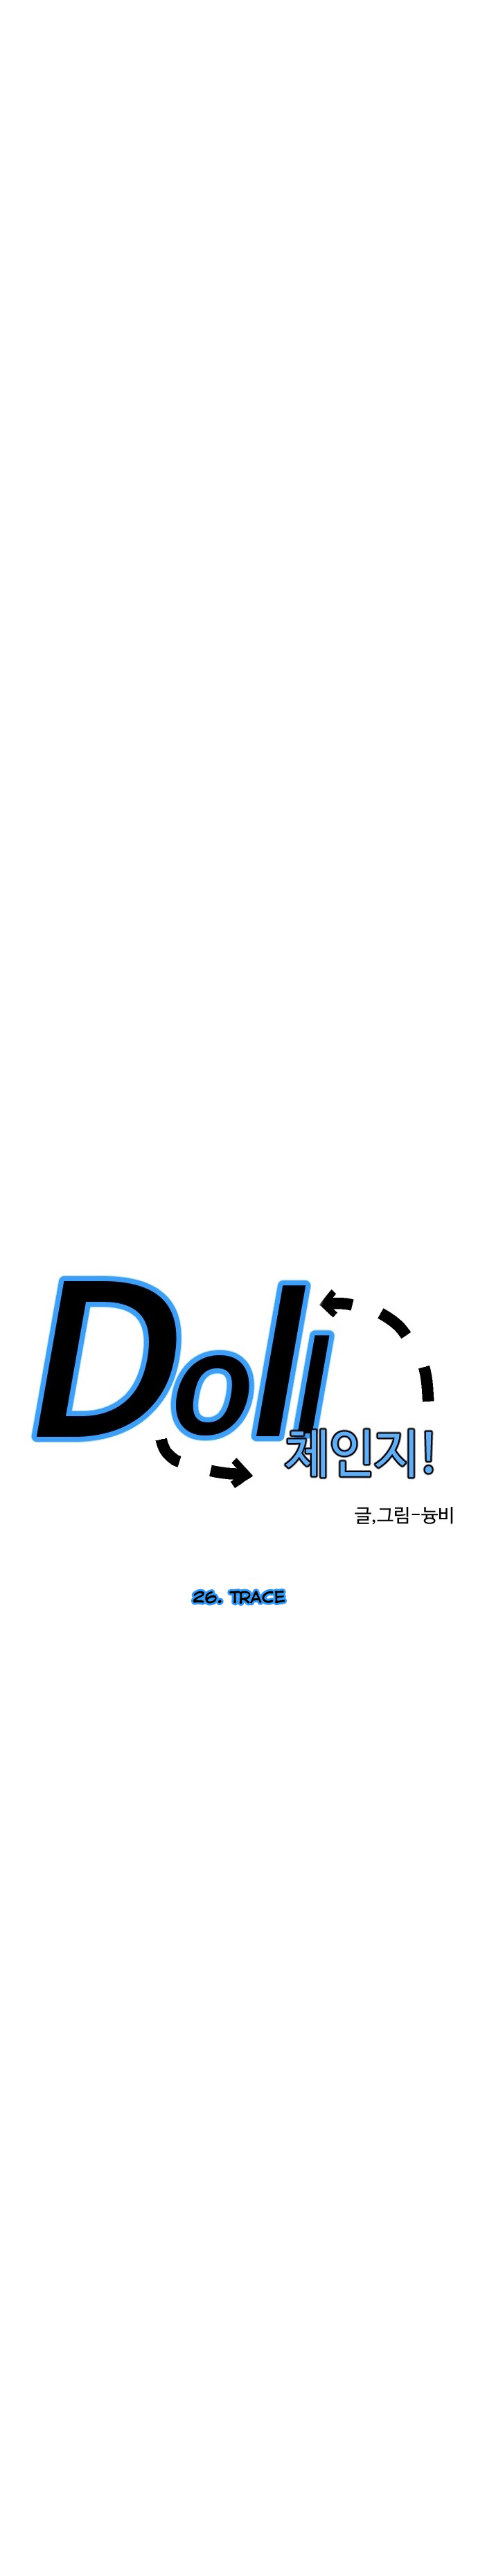 Doll Change Ch. 26 Chase